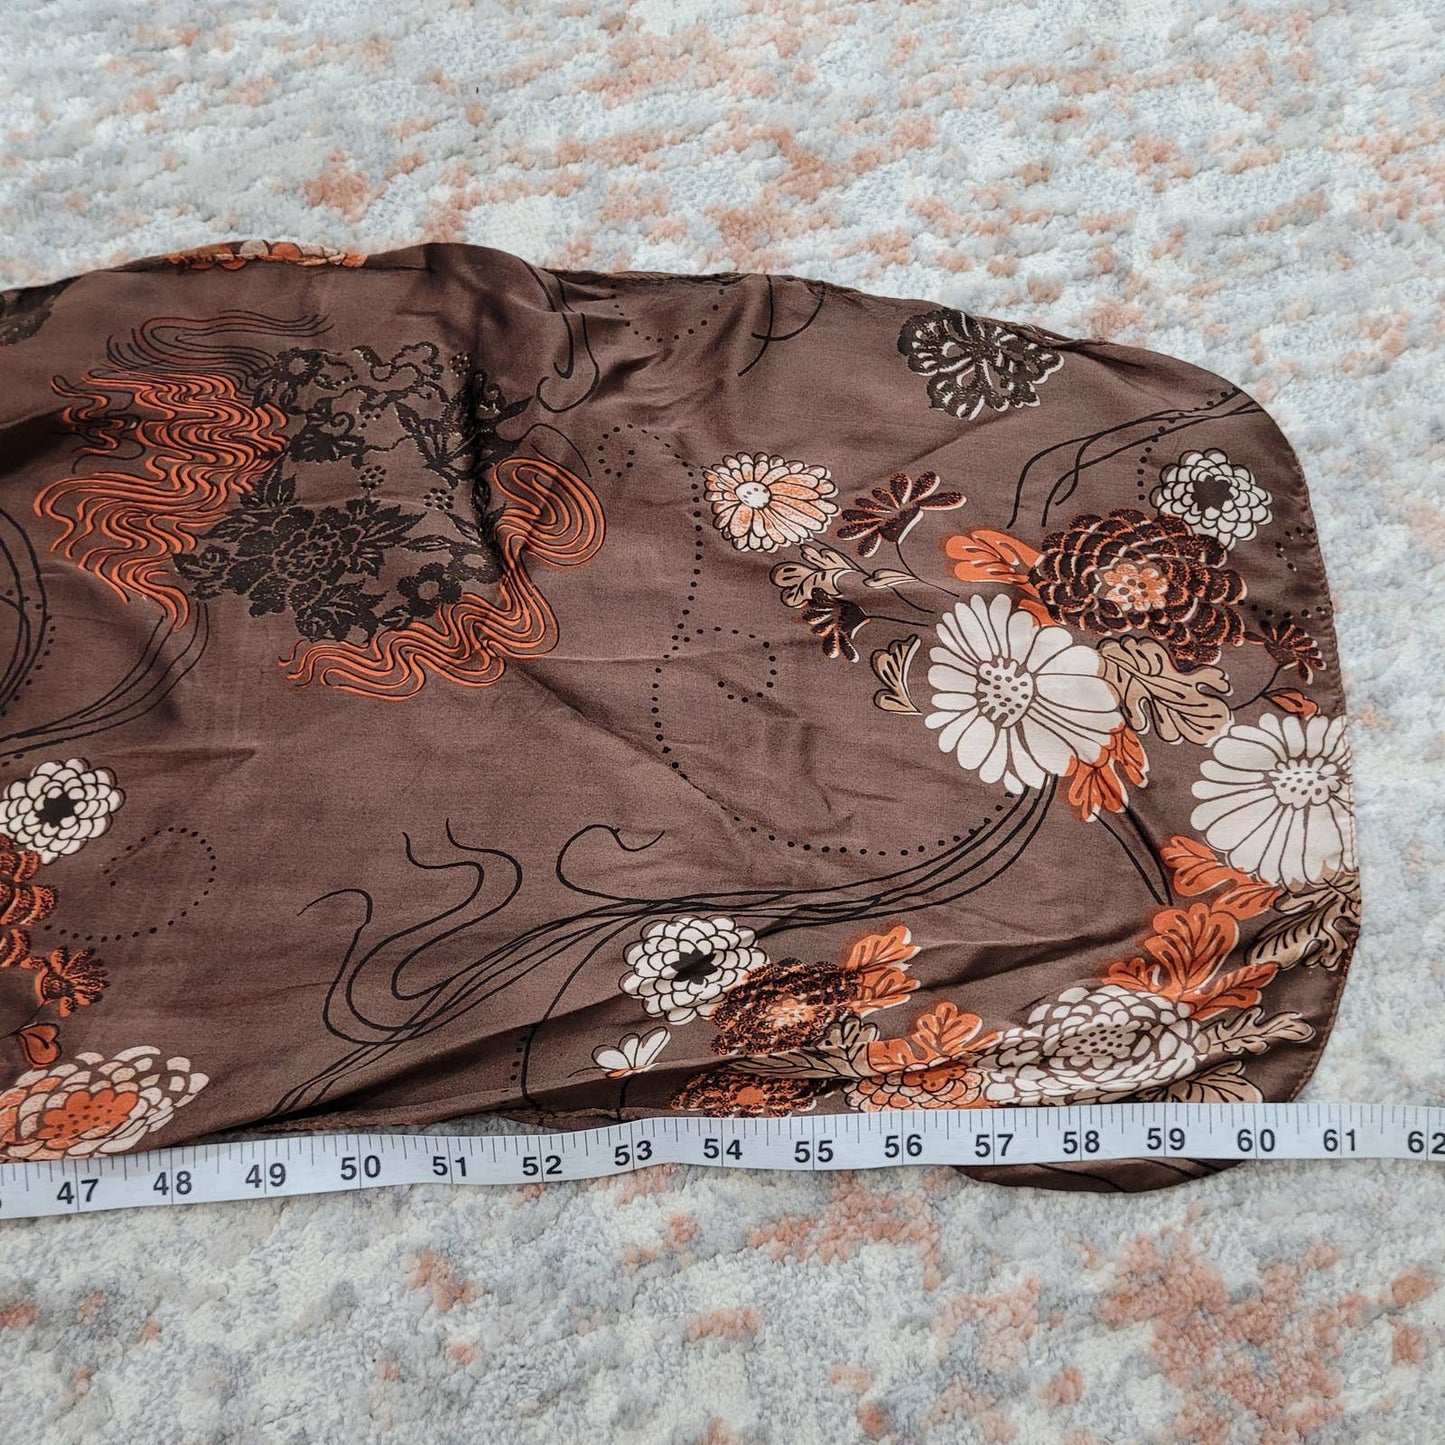 Long Brown Scarf with Orange and White Floral PatternMarkita's ClosetUnbranded